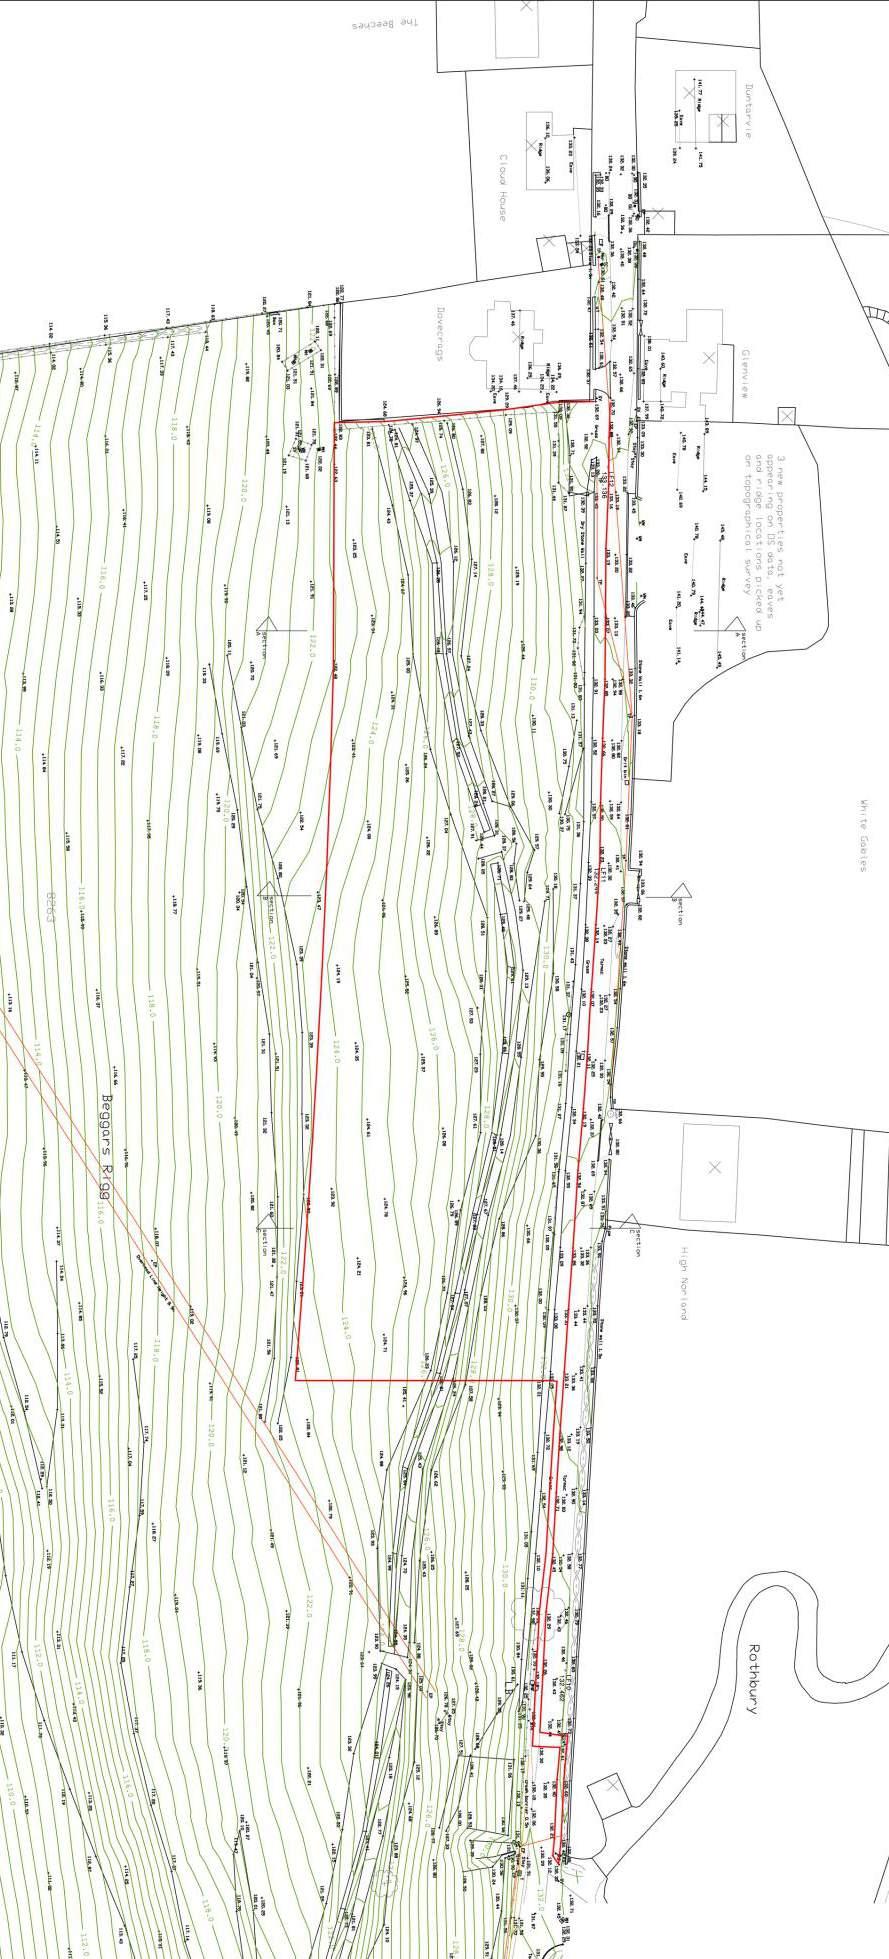 Constraints: 1 Fall on the land from north to south 2 The relatively narrow Hillside Road West with no footpath connection to the town centre 3 Potential loss privacy for houses on the north side of